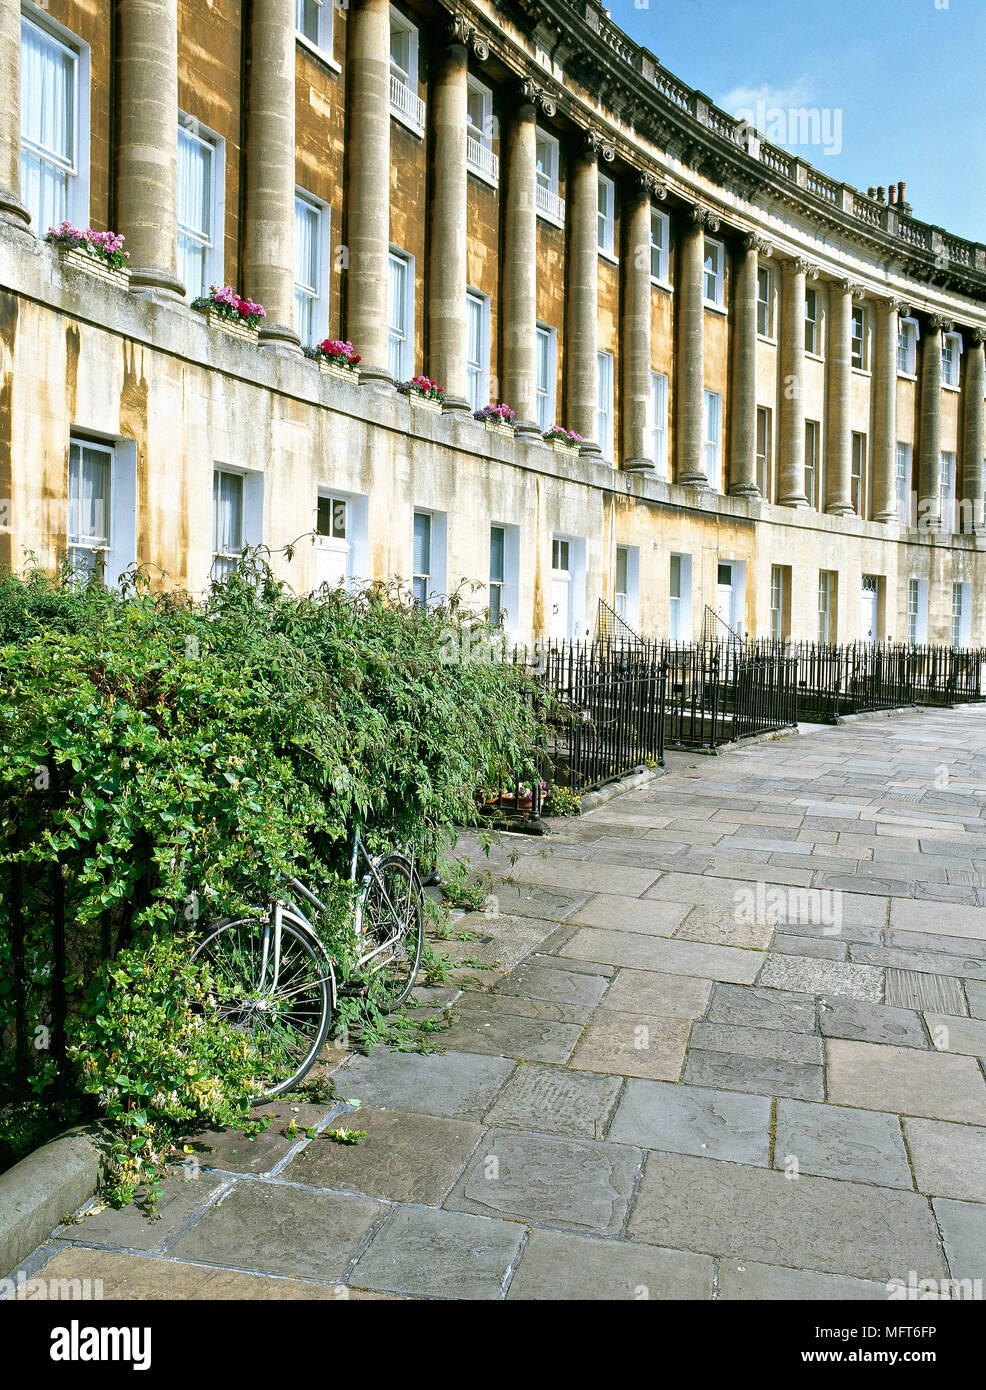 Exterior view of a column-lined apartment building bordering a Georgian crescent terrace. Stock Photo